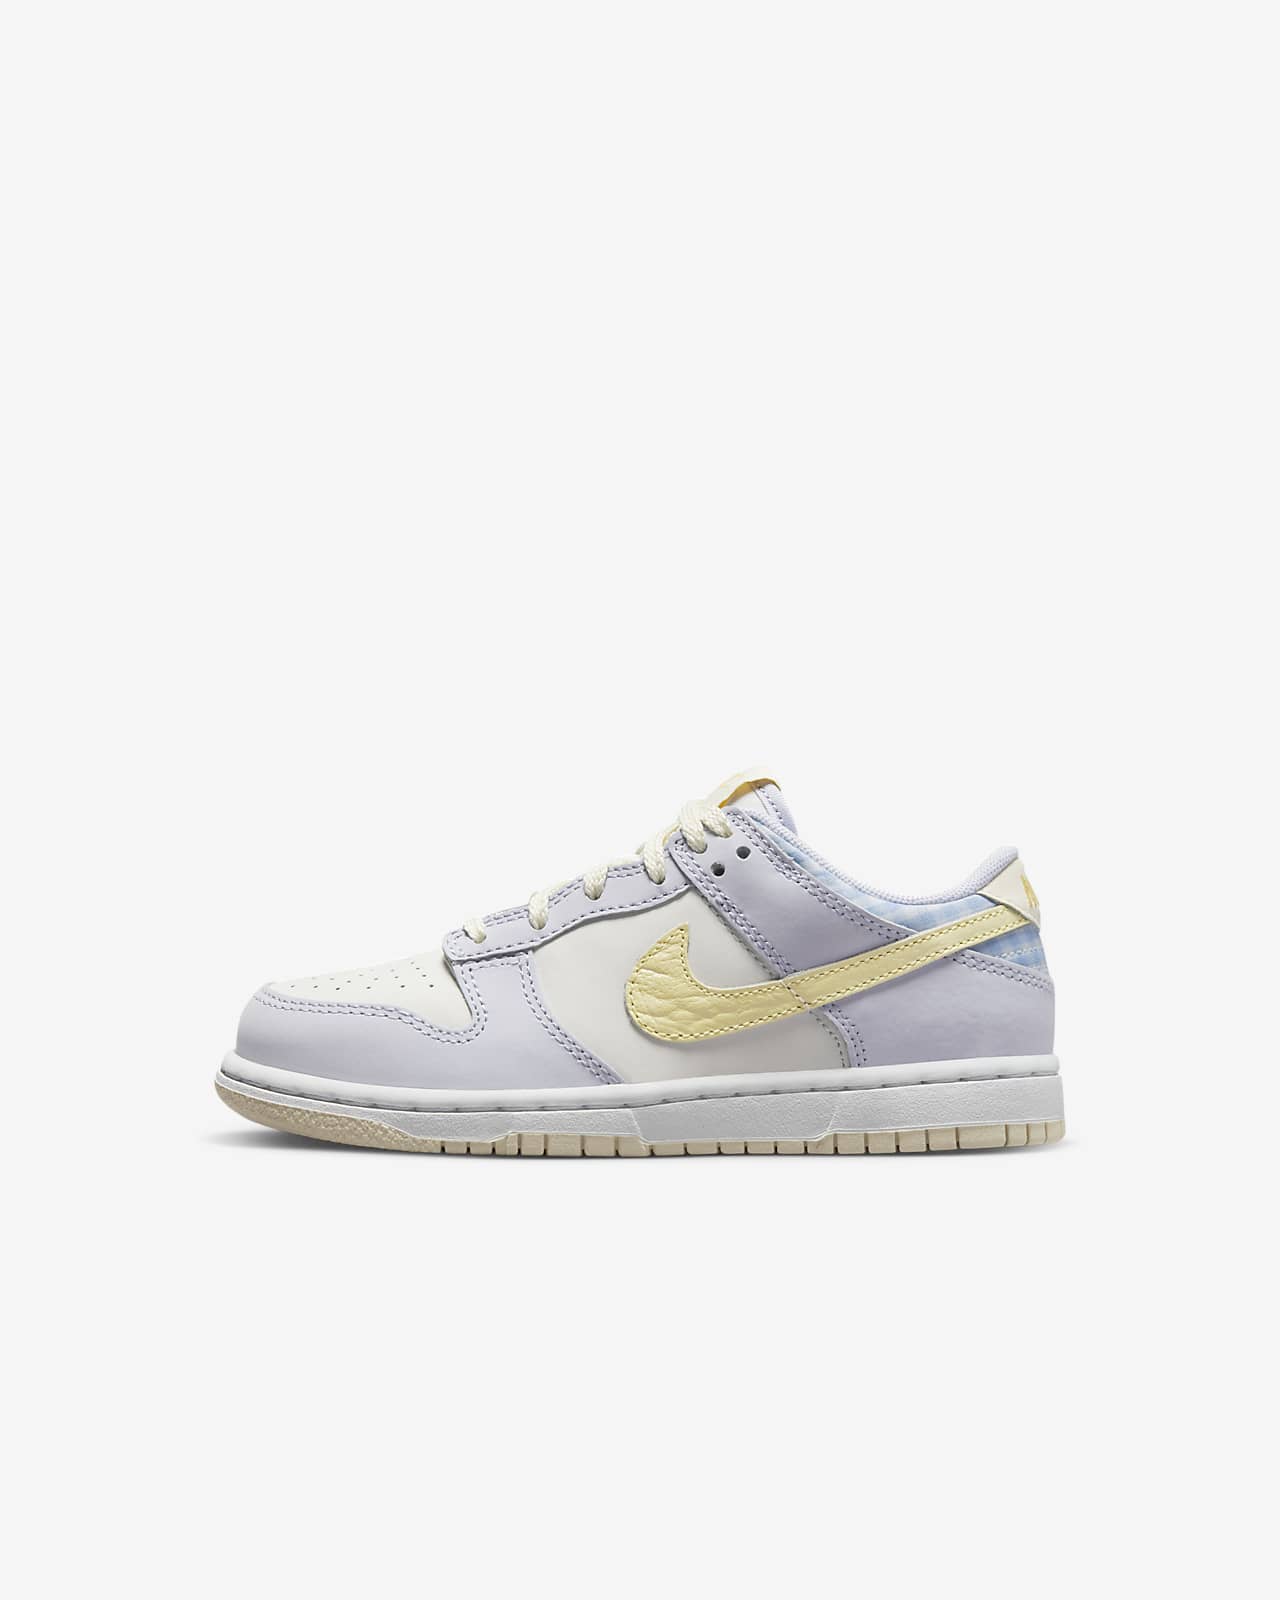 Nike Dunk High Younger Kids' Shoes